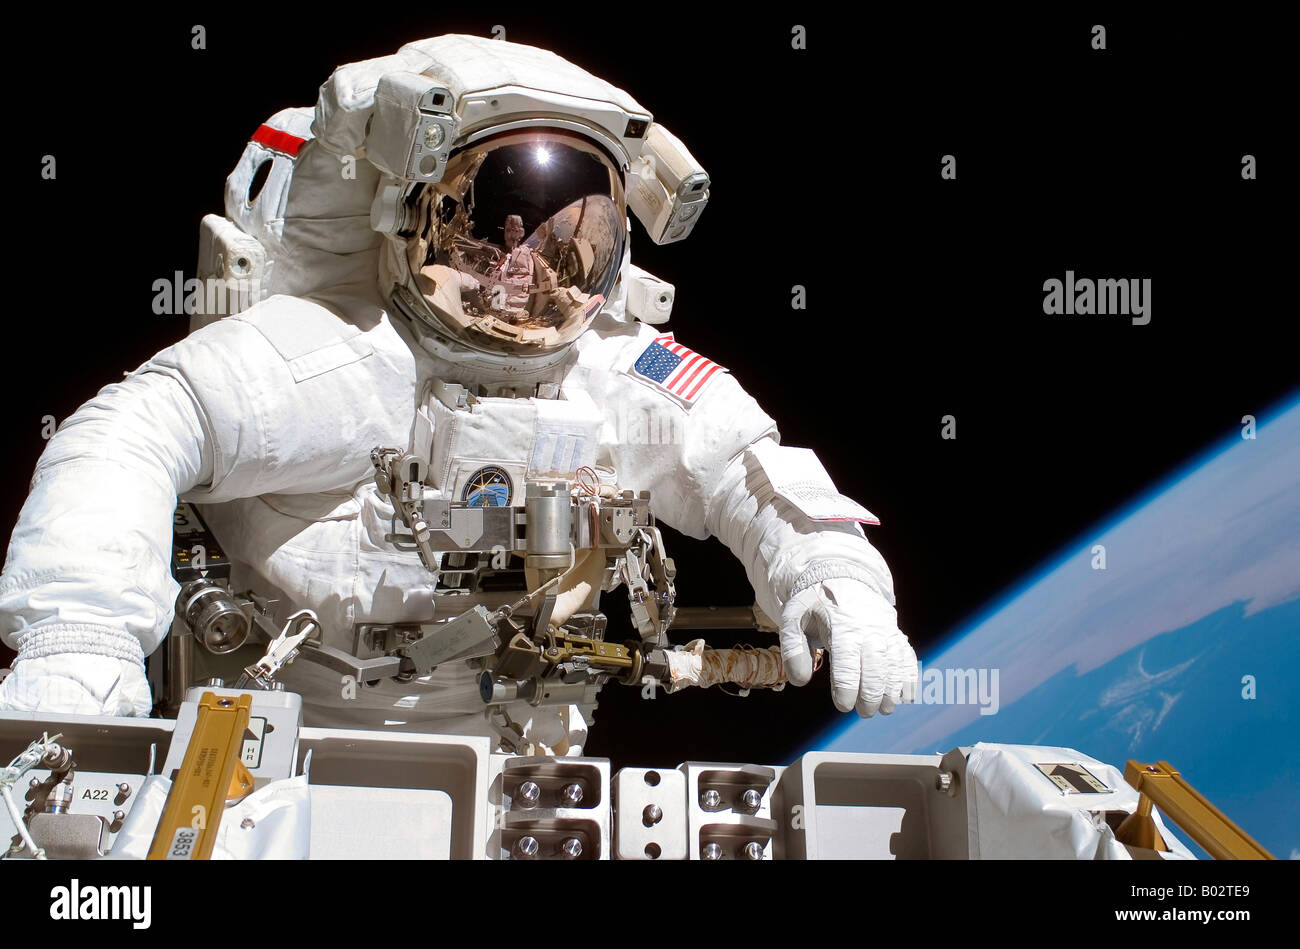 Astronaut participating in extravehicular activity. Stock Photo